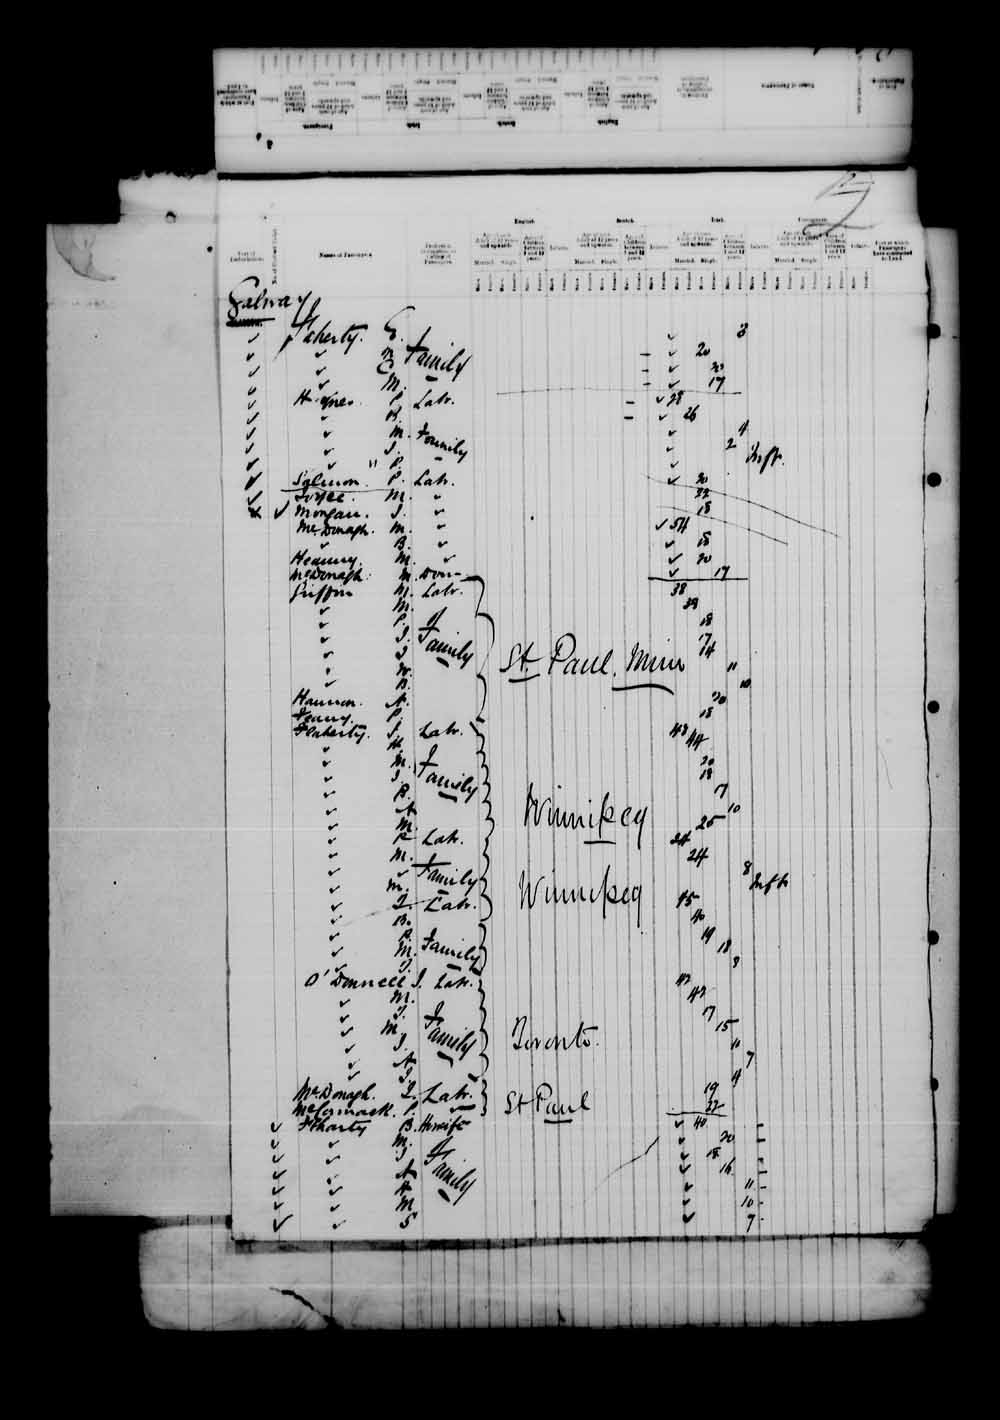 Digitized page of Passenger Lists for Image No.: e003542676